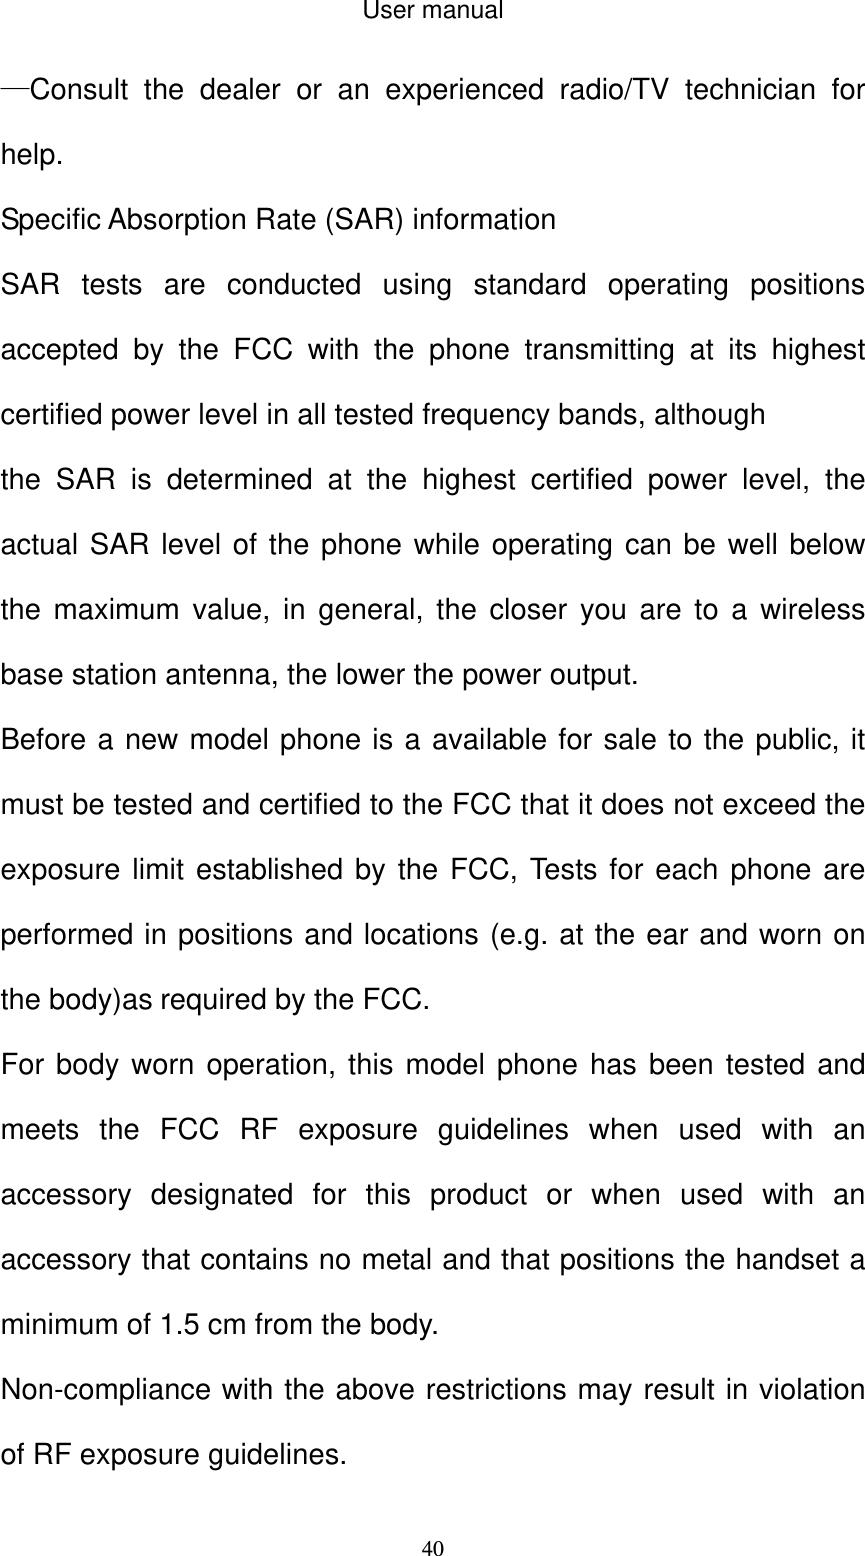 User manual  40—Consult the dealer or an experienced radio/TV technician for help.   Specific Absorption Rate (SAR) information SAR tests are conducted using standard operating positions accepted by the FCC with the phone transmitting at its highest certified power level in all tested frequency bands, although the SAR is determined at the highest certified power level, the actual SAR level of the phone while operating can be well below the maximum value, in general, the closer you are to a wireless base station antenna, the lower the power output. Before a new model phone is a available for sale to the public, it must be tested and certified to the FCC that it does not exceed the exposure limit established by the FCC, Tests for each phone are performed in positions and locations (e.g. at the ear and worn on the body)as required by the FCC. For body worn operation, this model phone has been tested and meets the FCC RF exposure guidelines when used with an accessory designated for this product or when used with an accessory that contains no metal and that positions the handset a minimum of 1.5 cm from the body. Non-compliance with the above restrictions may result in violation of RF exposure guidelines. 